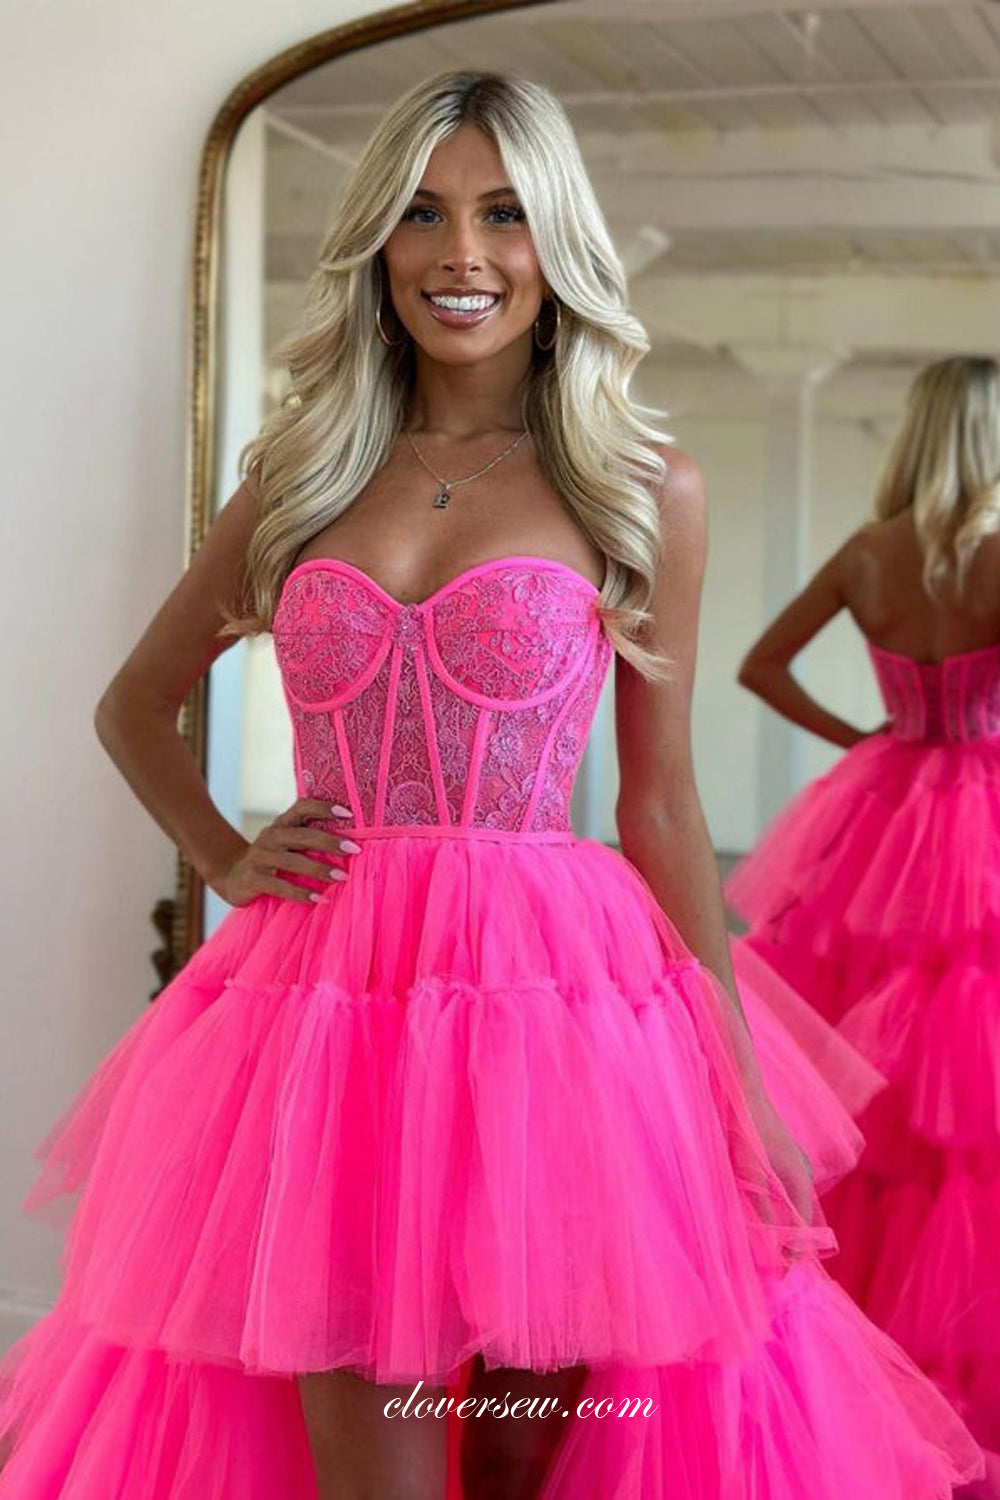 Hot Pink Lace Sweetheart Strapless Tiered High Low Fashion Prom Dresses, CP1022